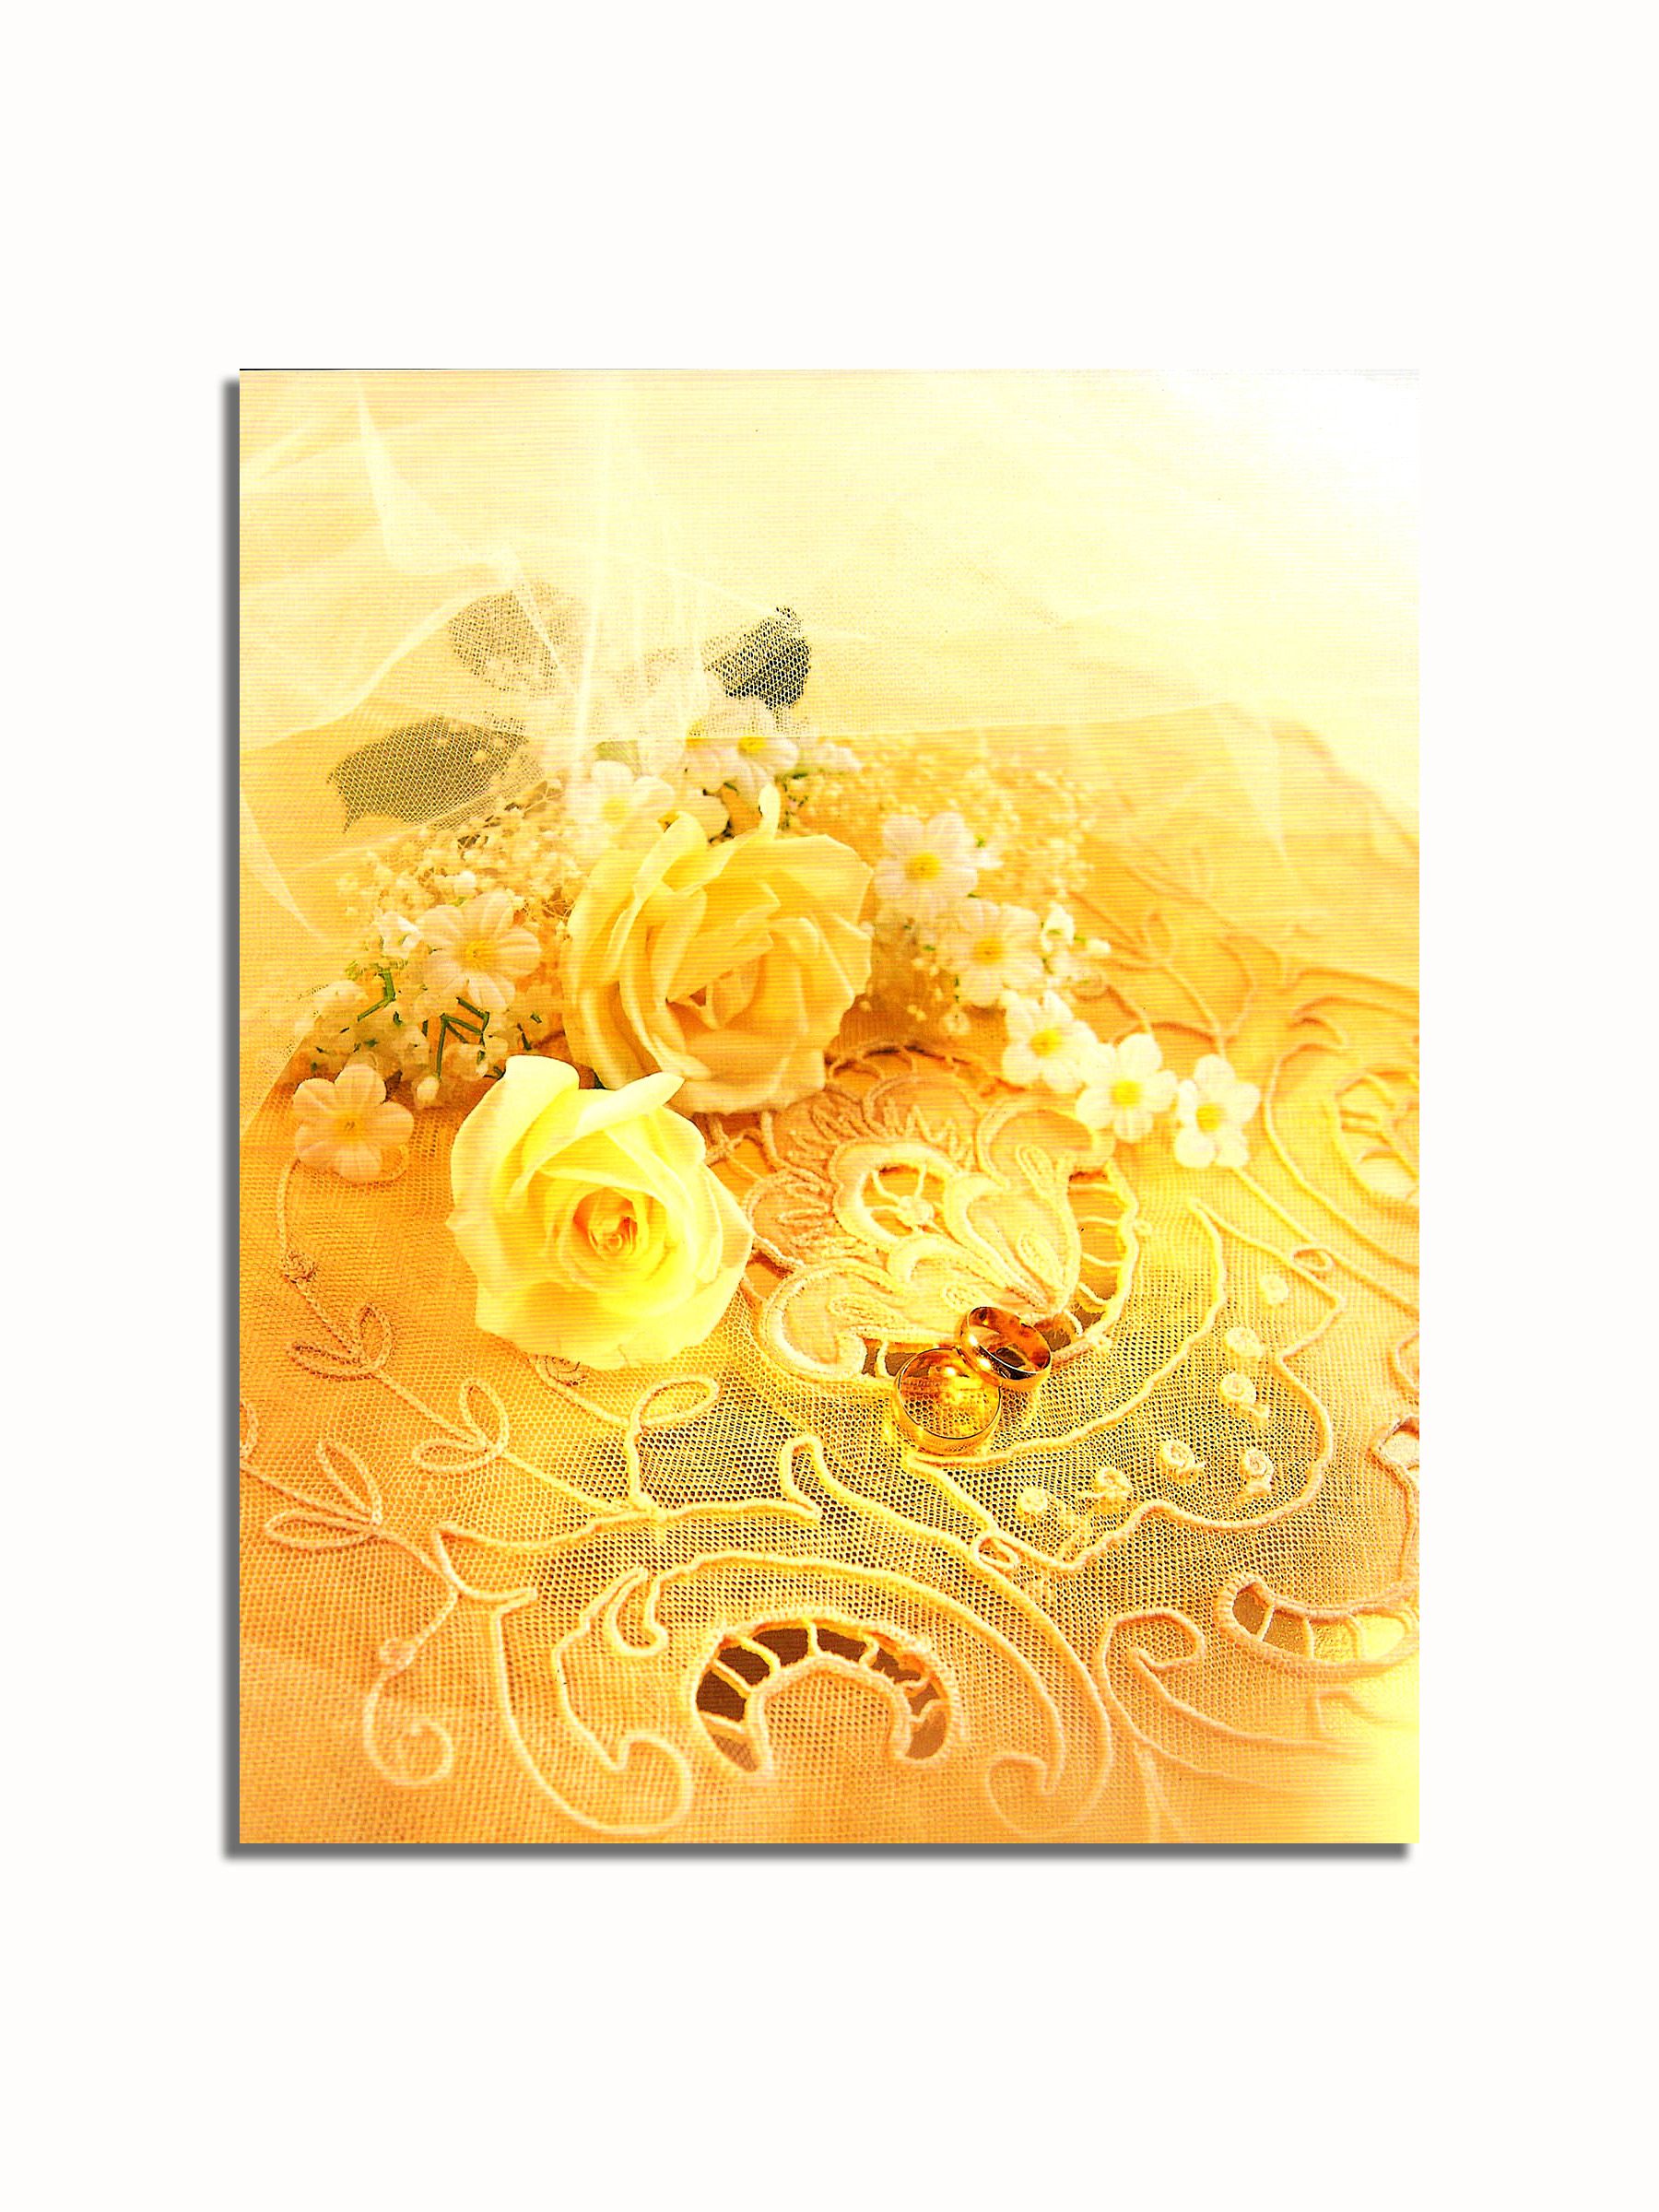 Newest Lace Wall Art Throughout Yellow Roses On Lace Flowers Wall Picture 8x10 Art Print – Walmart (View 15 of 15)